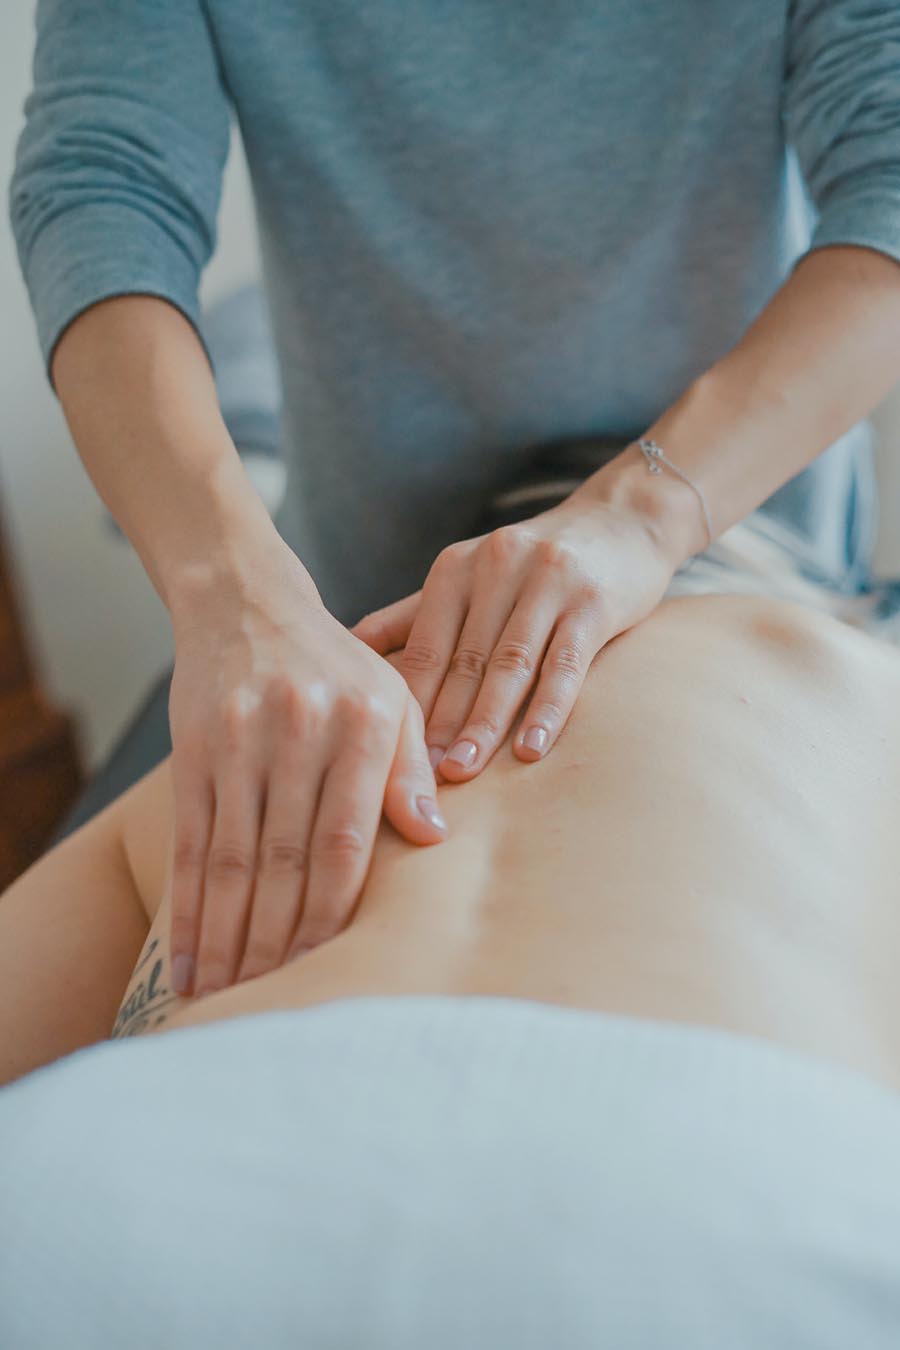 Is it safe to have a massage if you have a heart condition? - BHF